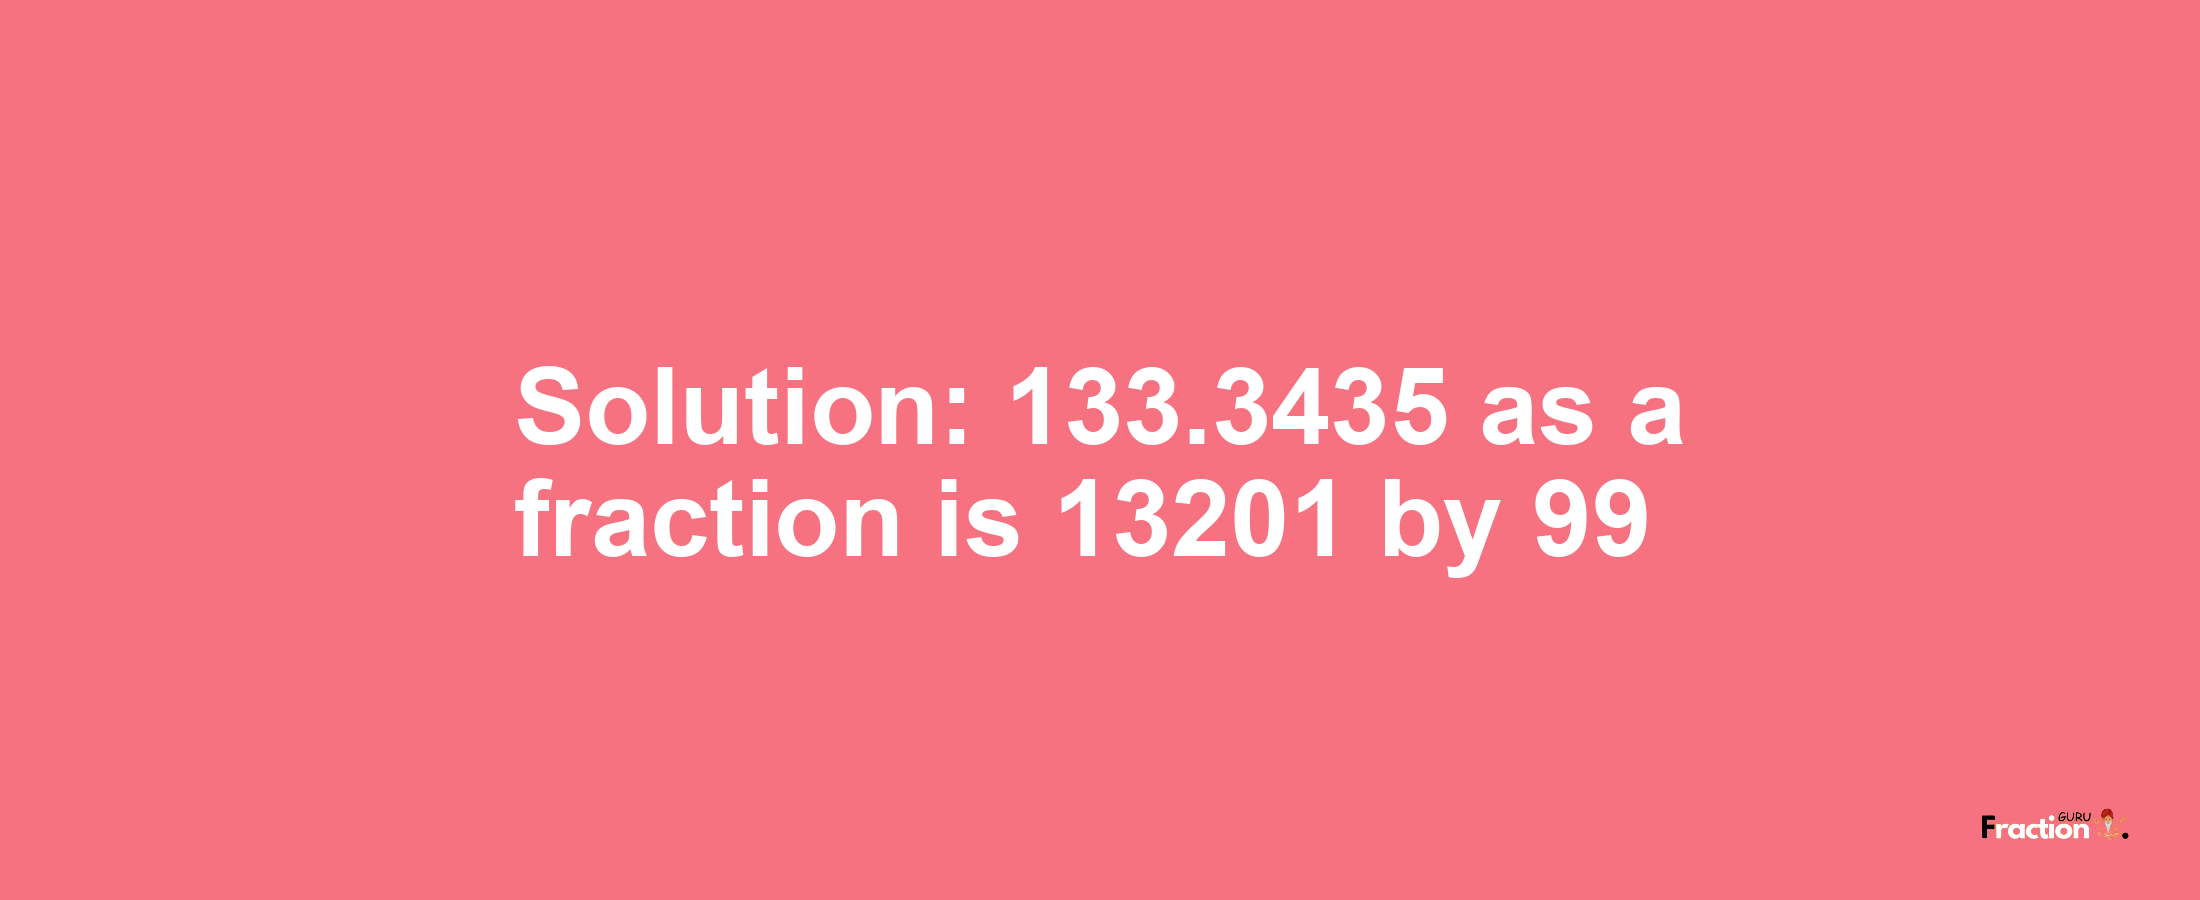 Solution:133.3435 as a fraction is 13201/99